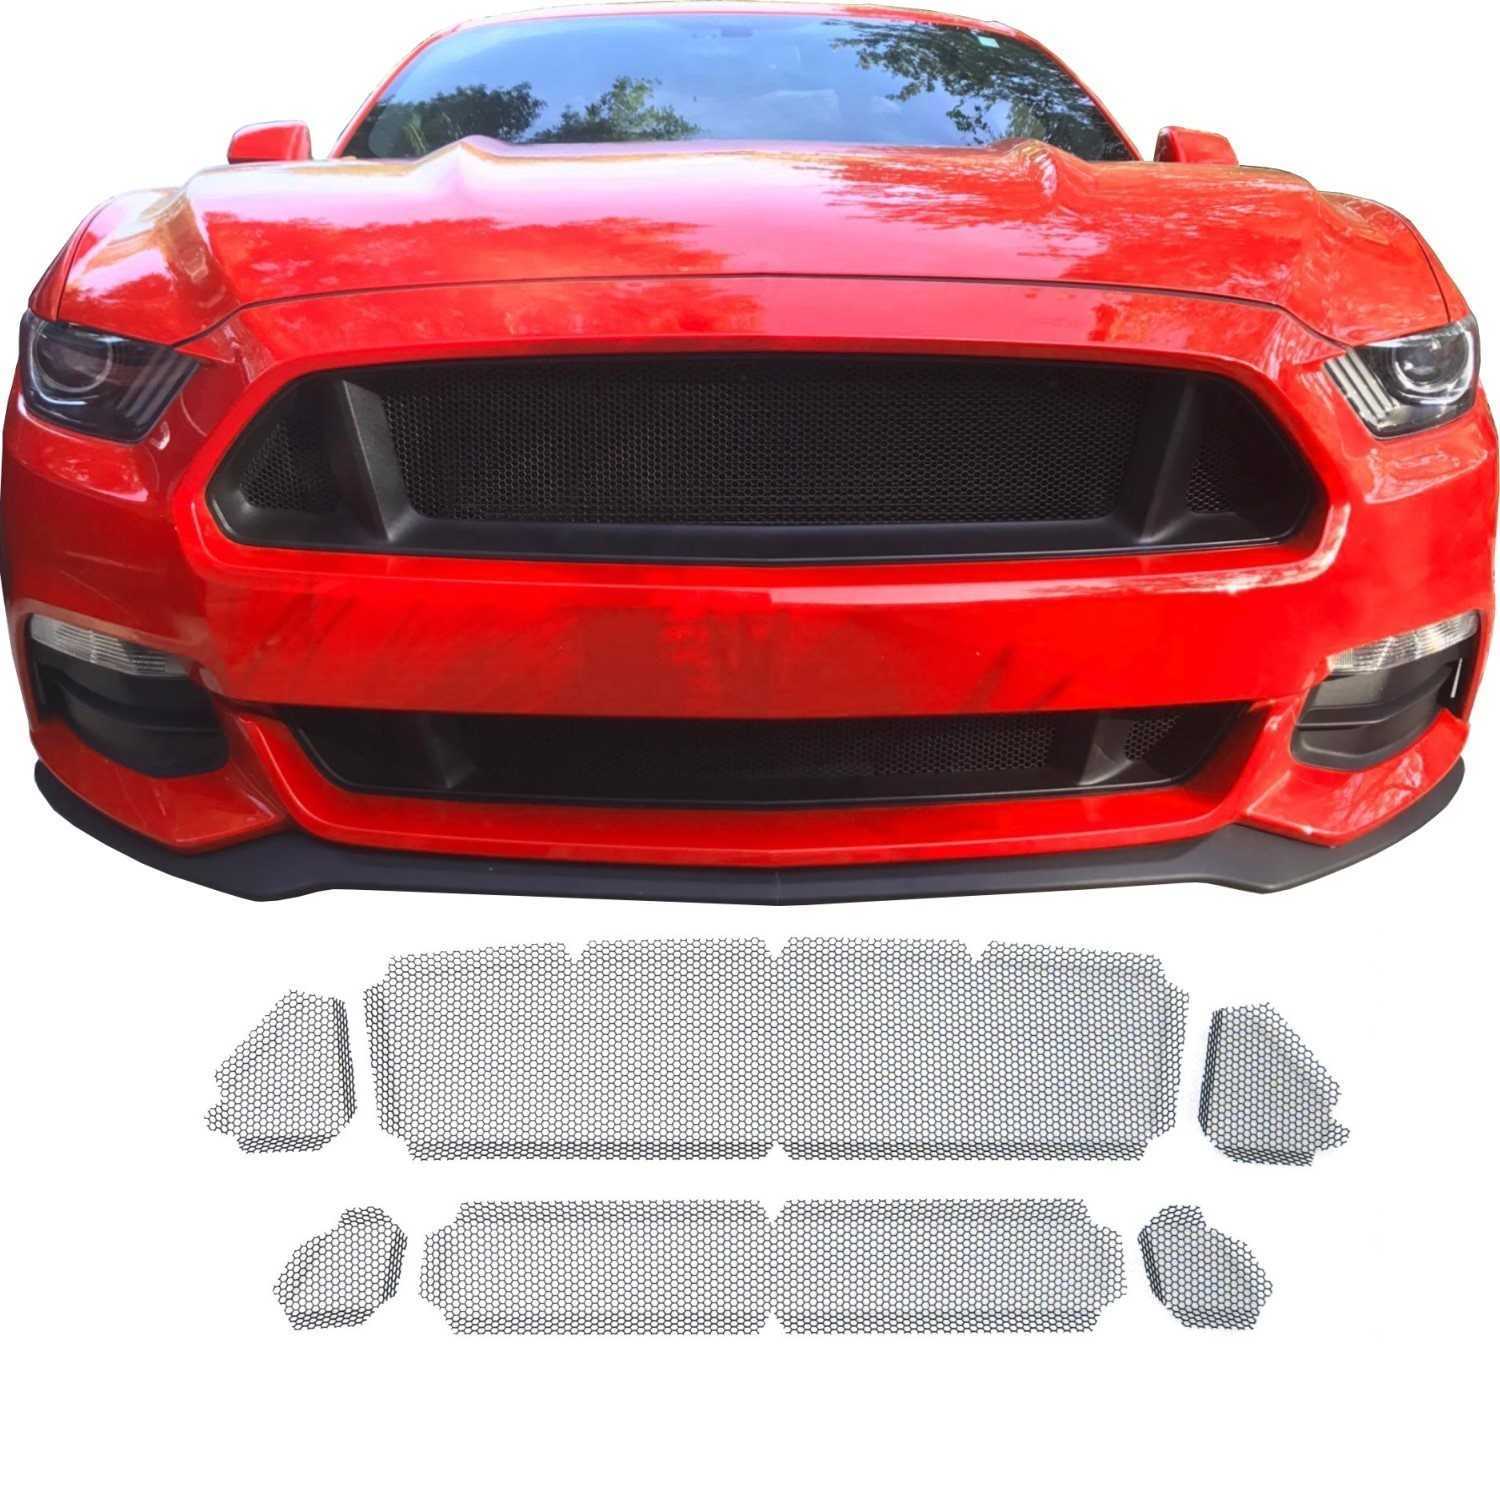 Honeycomb Mesh Grill Kit for 2015 - 2017 Ford Mustang GT